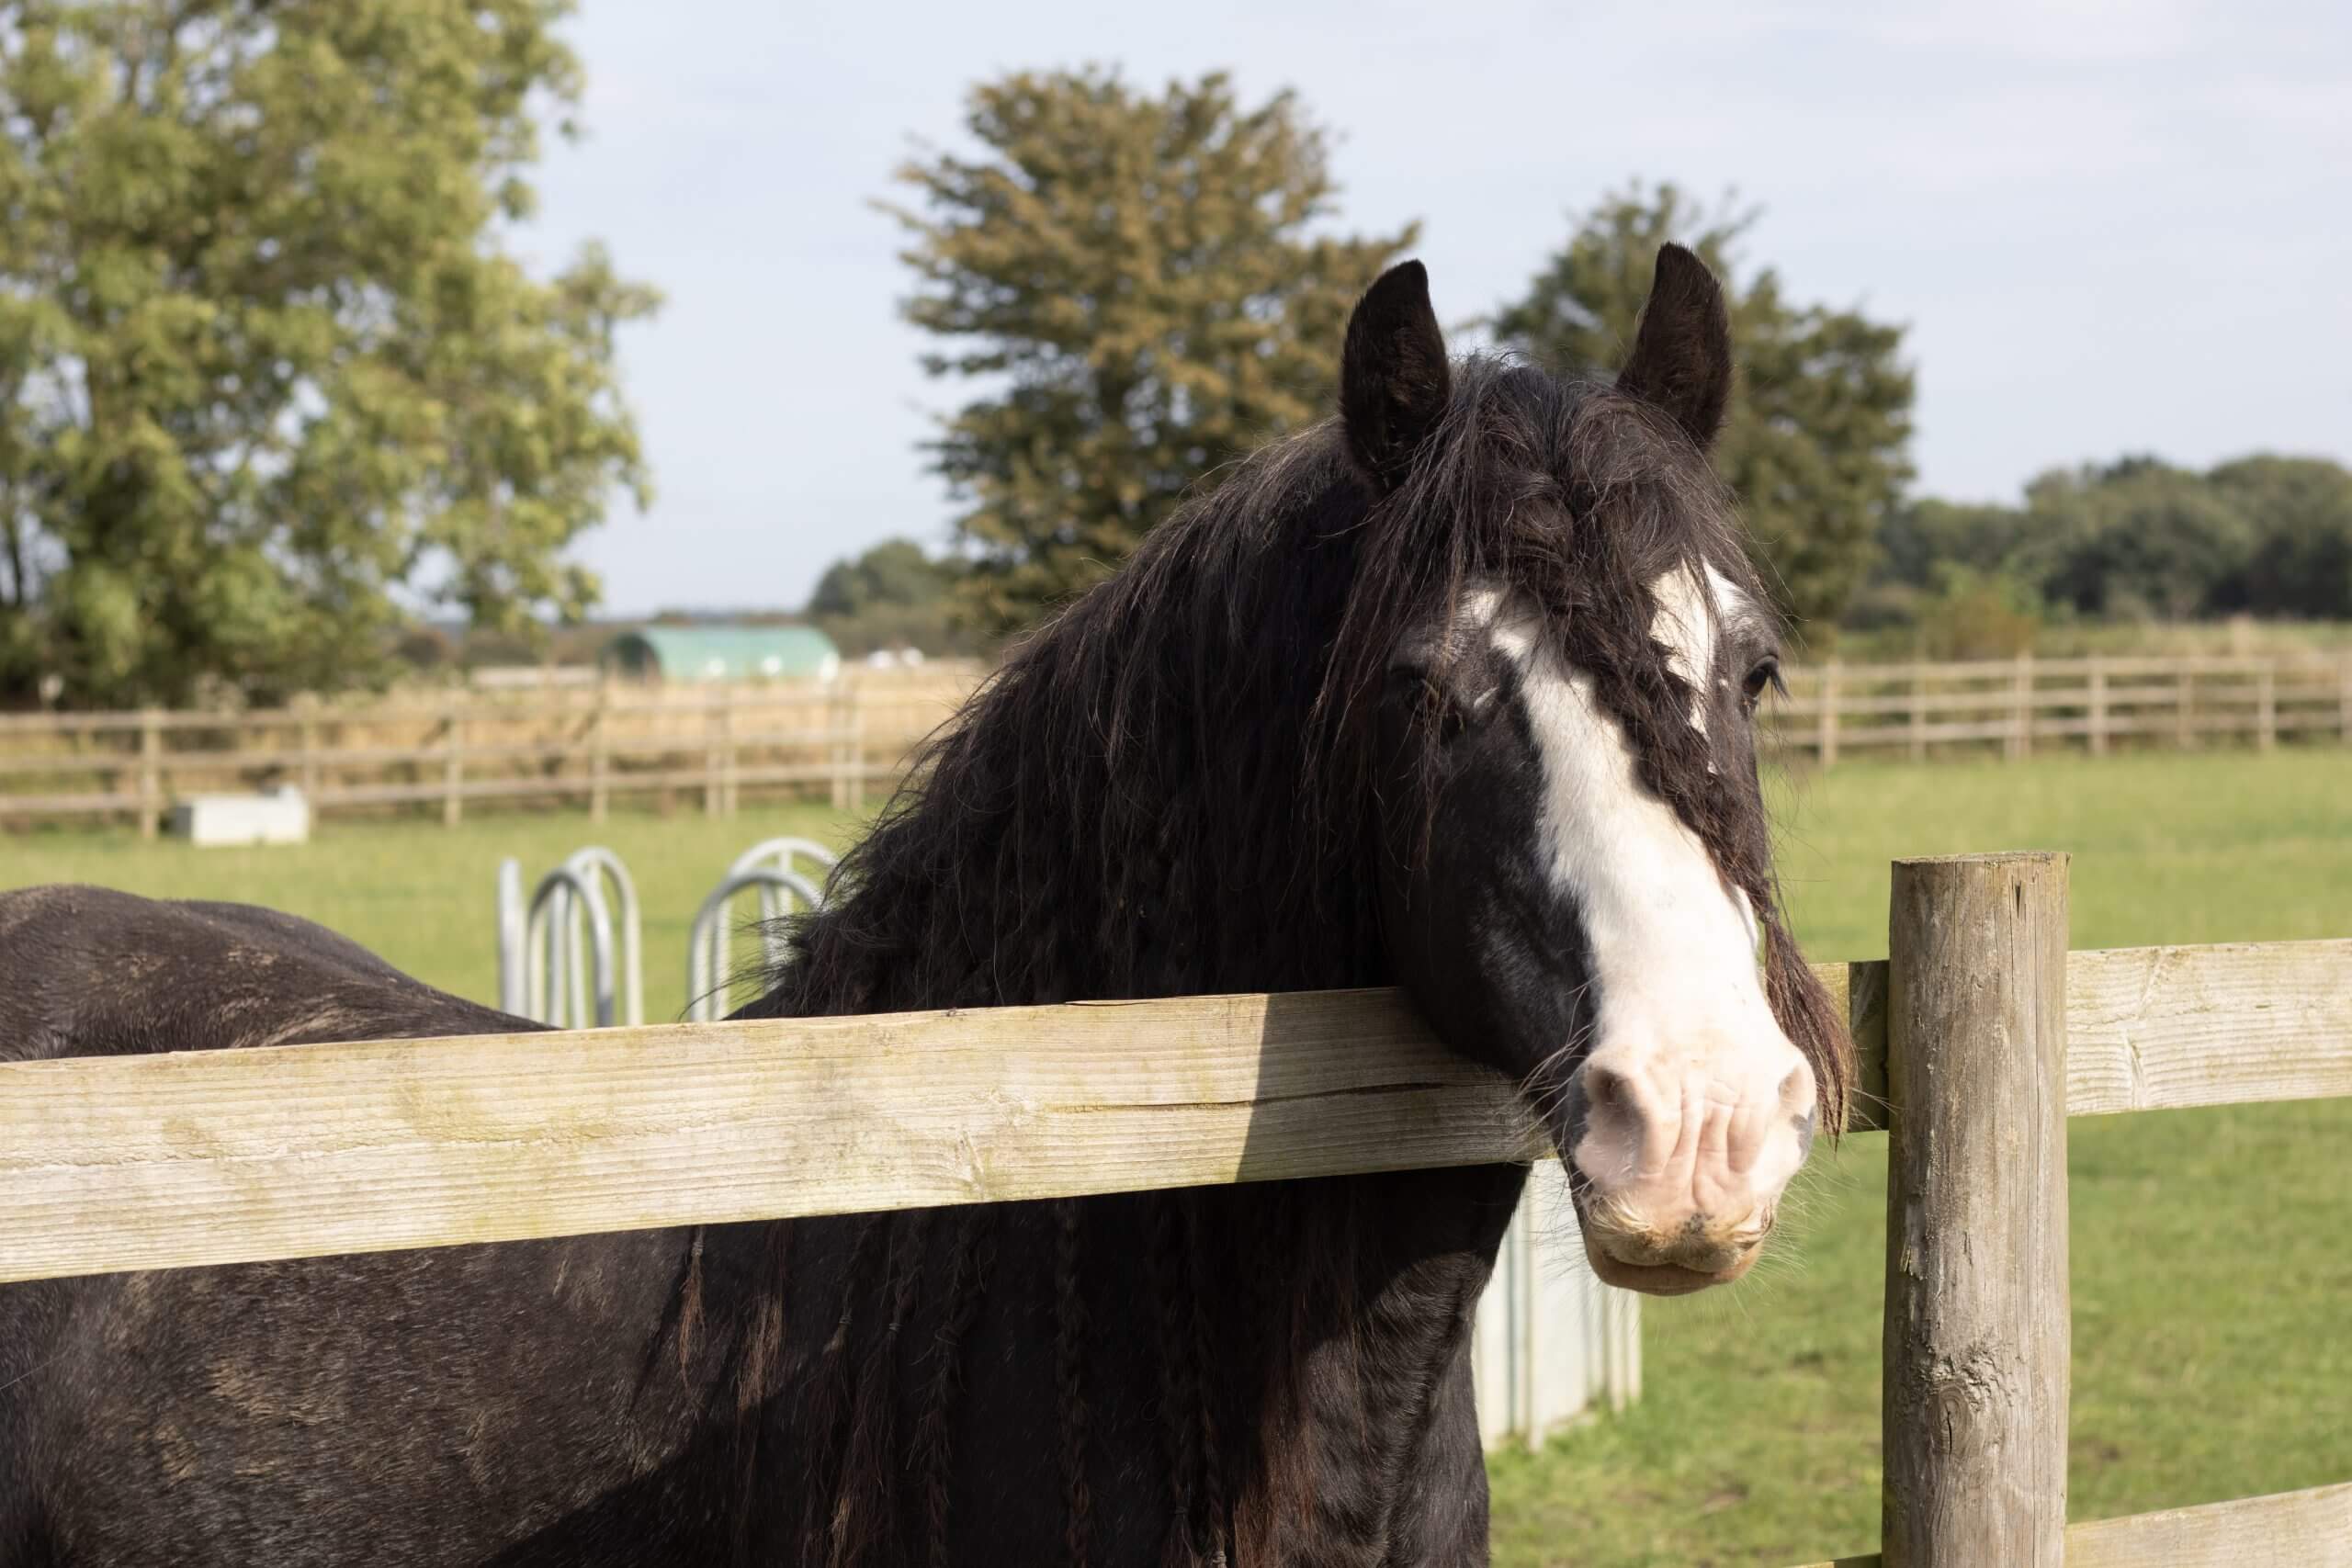 pony with a braided forelock with their head over the fence looking at the camera